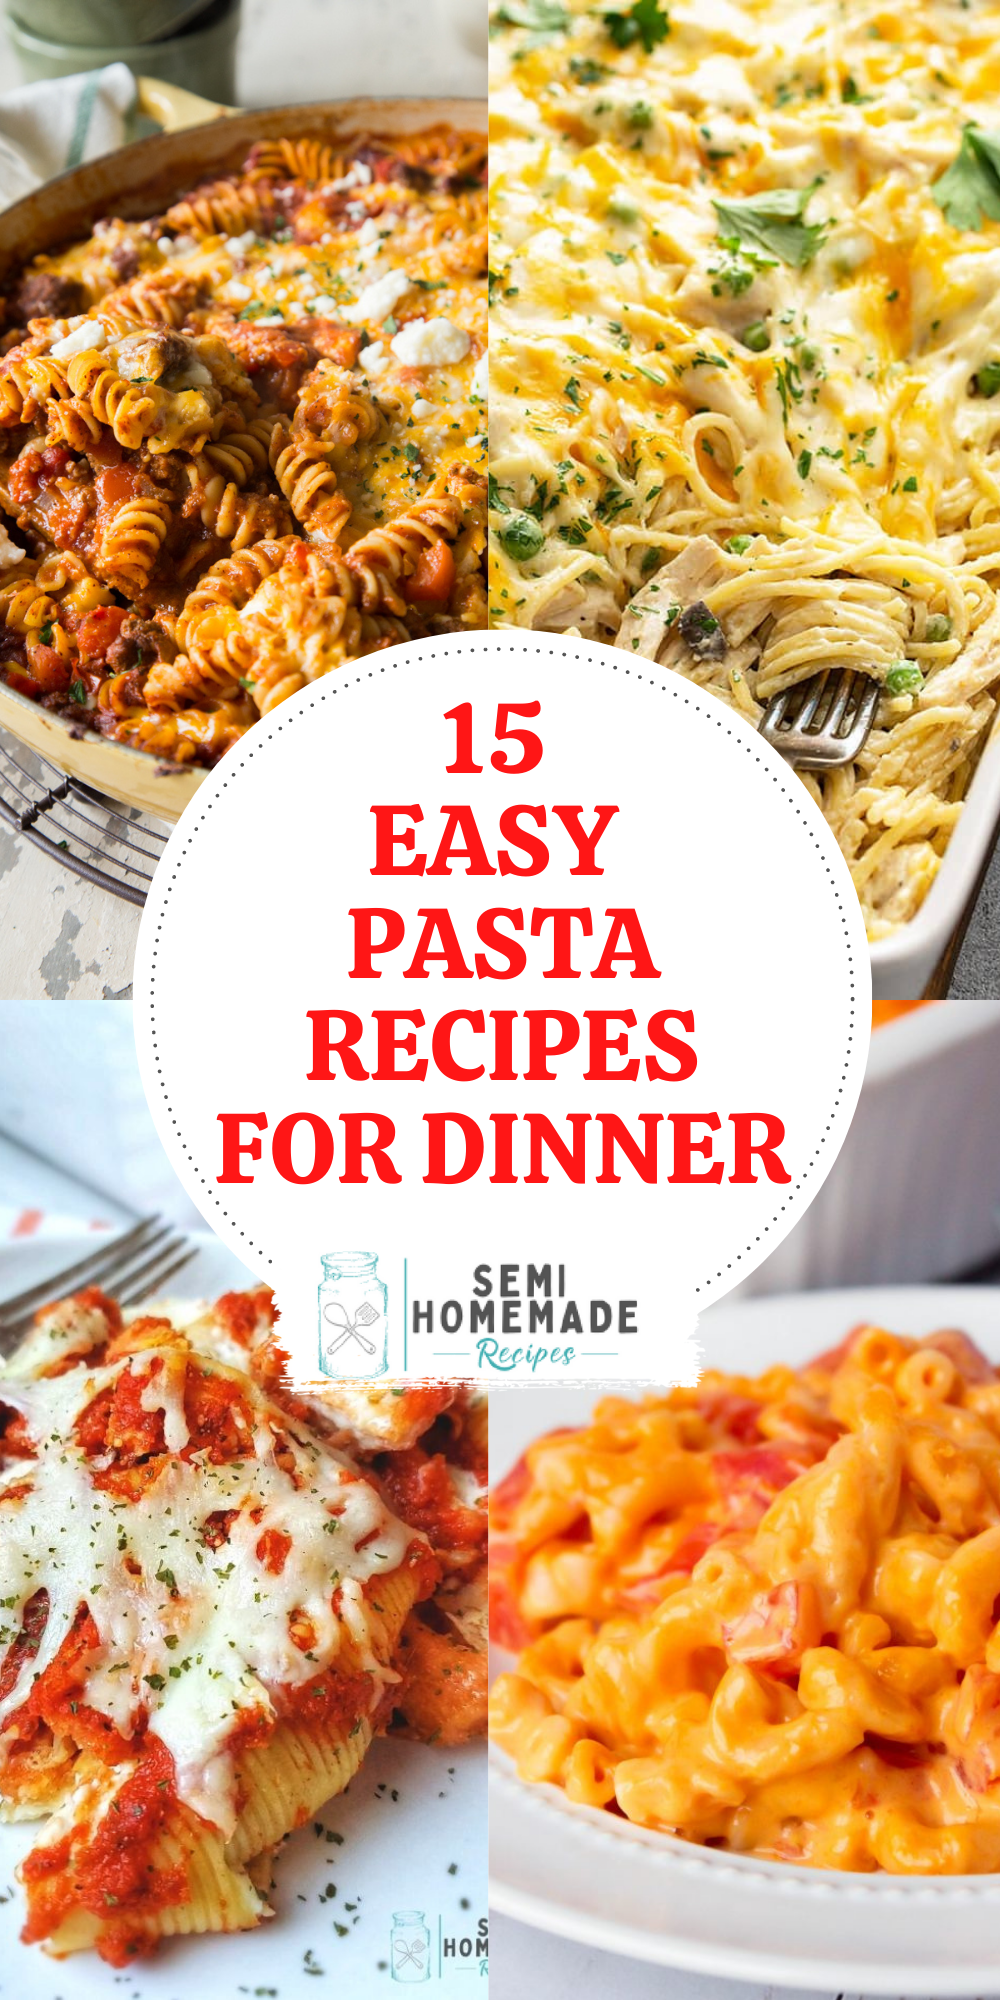 Love Pasta and need some easy dinner ideas? You've come to the right place! Here are 15 Easy Pasta Recipes for Dinner or lunch that you're going to love! 